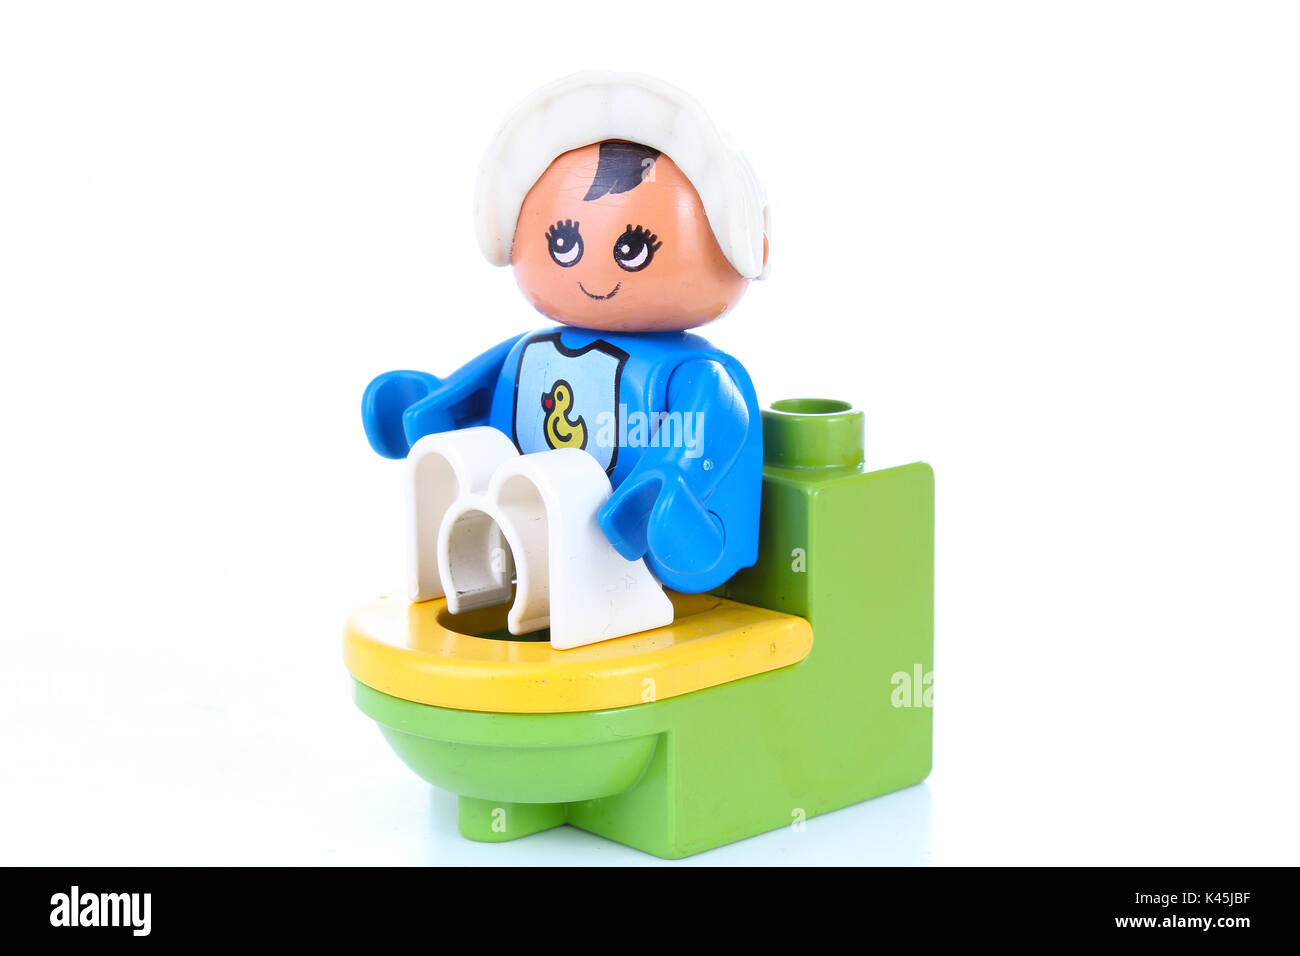 Baby kid child on wc. Children first toilet use or learning how to use toilet illustration. Stock Photo